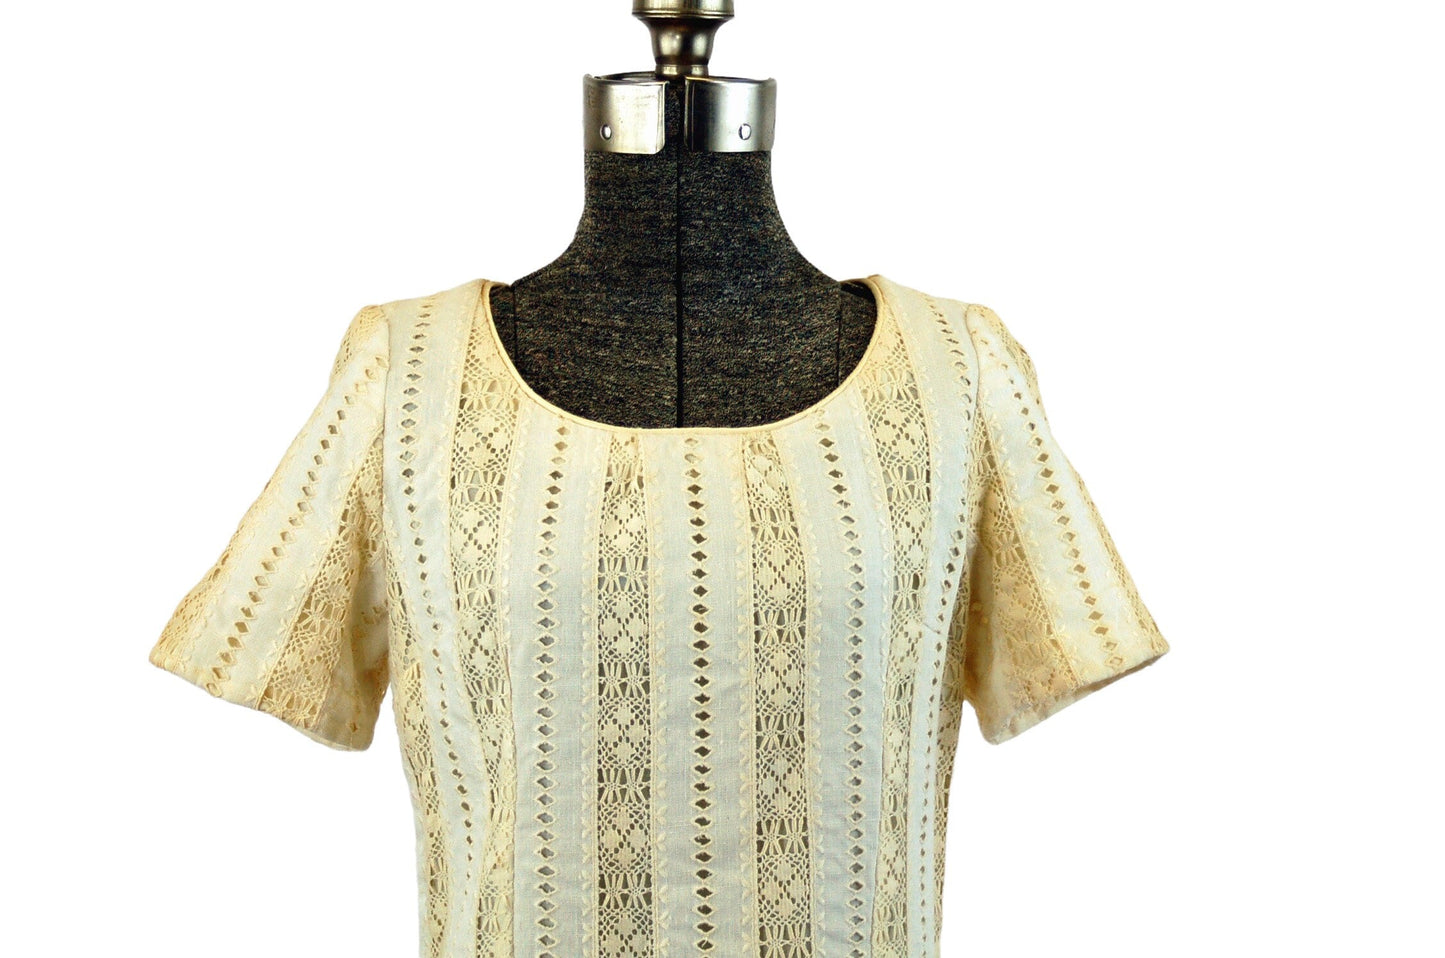 1960s linen dress ivory shift dress with lace inserts embroidery Size S/M